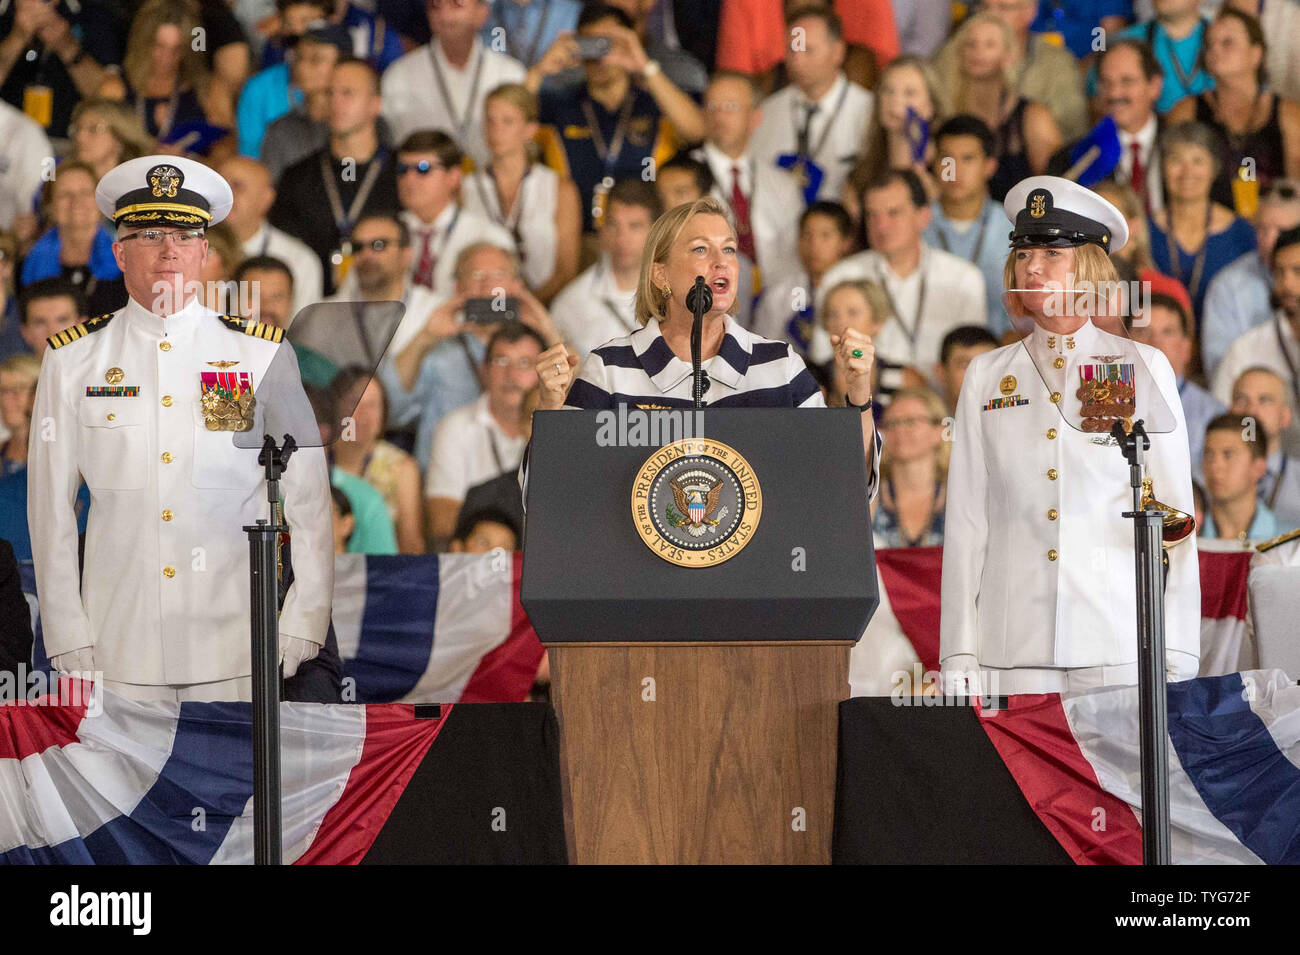 Susan Ford Bales, youngest child and only daughter of former U.S. President Gerald Ford and former First Lady Betty Ford, gives orders to man the ship and to bring life the USS Gerald R. Ford (CVN78) during its commissioning ceremony at Norfolk Naval Base, Virginia on July 22, 2017. The aircraft carrier is named after President Ford who served aboard the USS Monterey in the Pacific during World War II, and was the first president to serve aboard an aircraft carrier.    Photo by Ken Cedeno/UPI Stock Photo